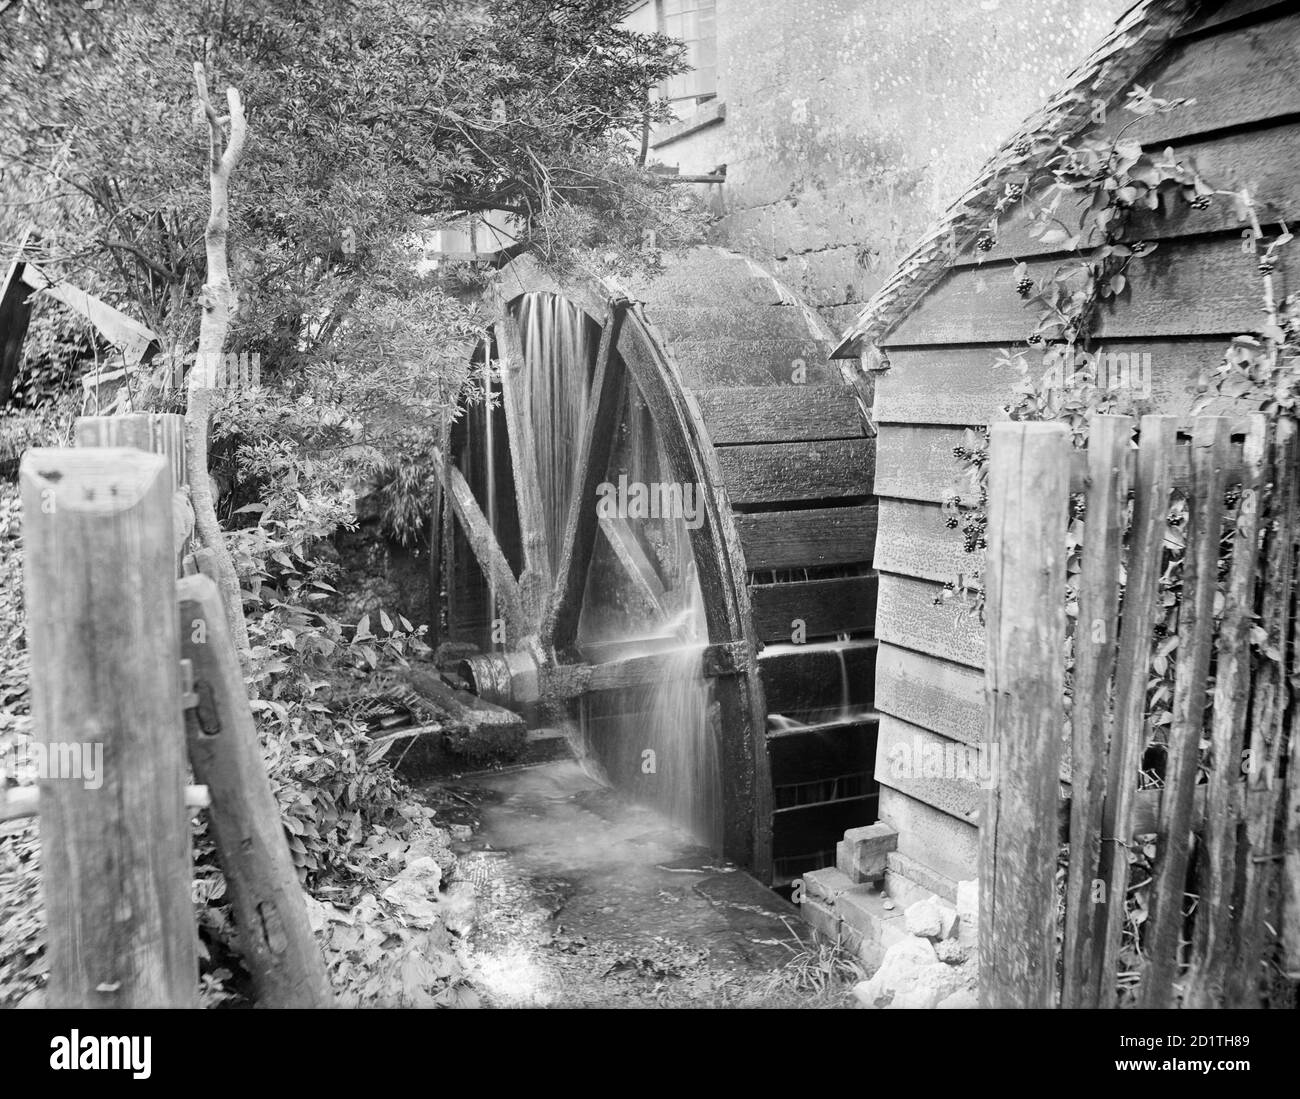 OLD MILL, Chipping Campden, Gloucestershire. An exterior view showing the waterwheel at work. There are four watermills in Chipping Campden on the sites of medieval mills mentioned in the Domesday Book. Photographed in 1900 by Henry Taunt. Stock Photo